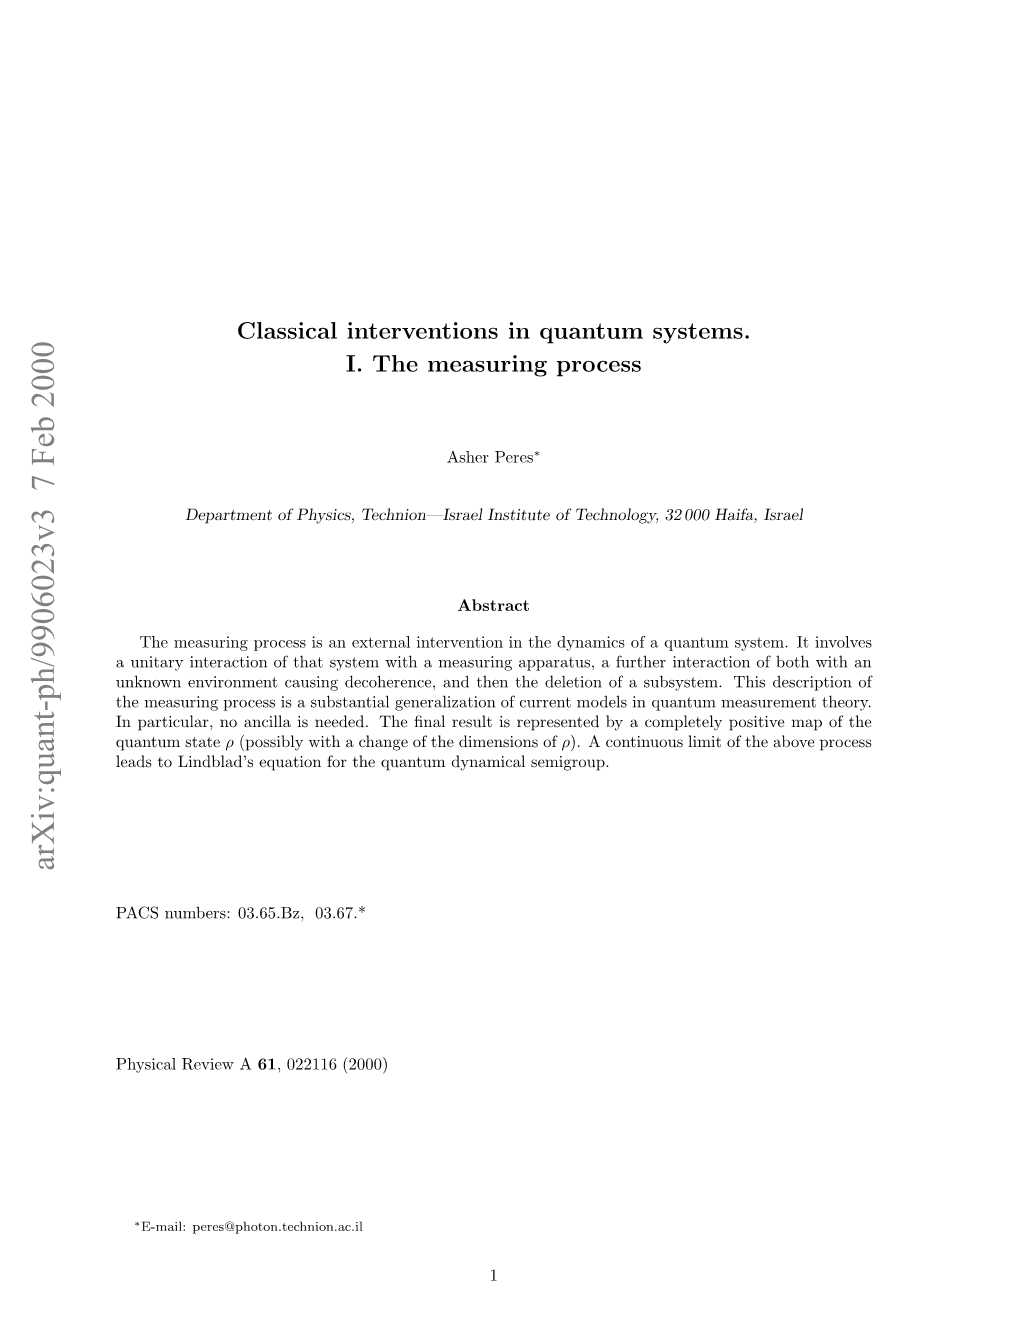 Classical Interventions in Quantum Systems. I. the Measuring Process